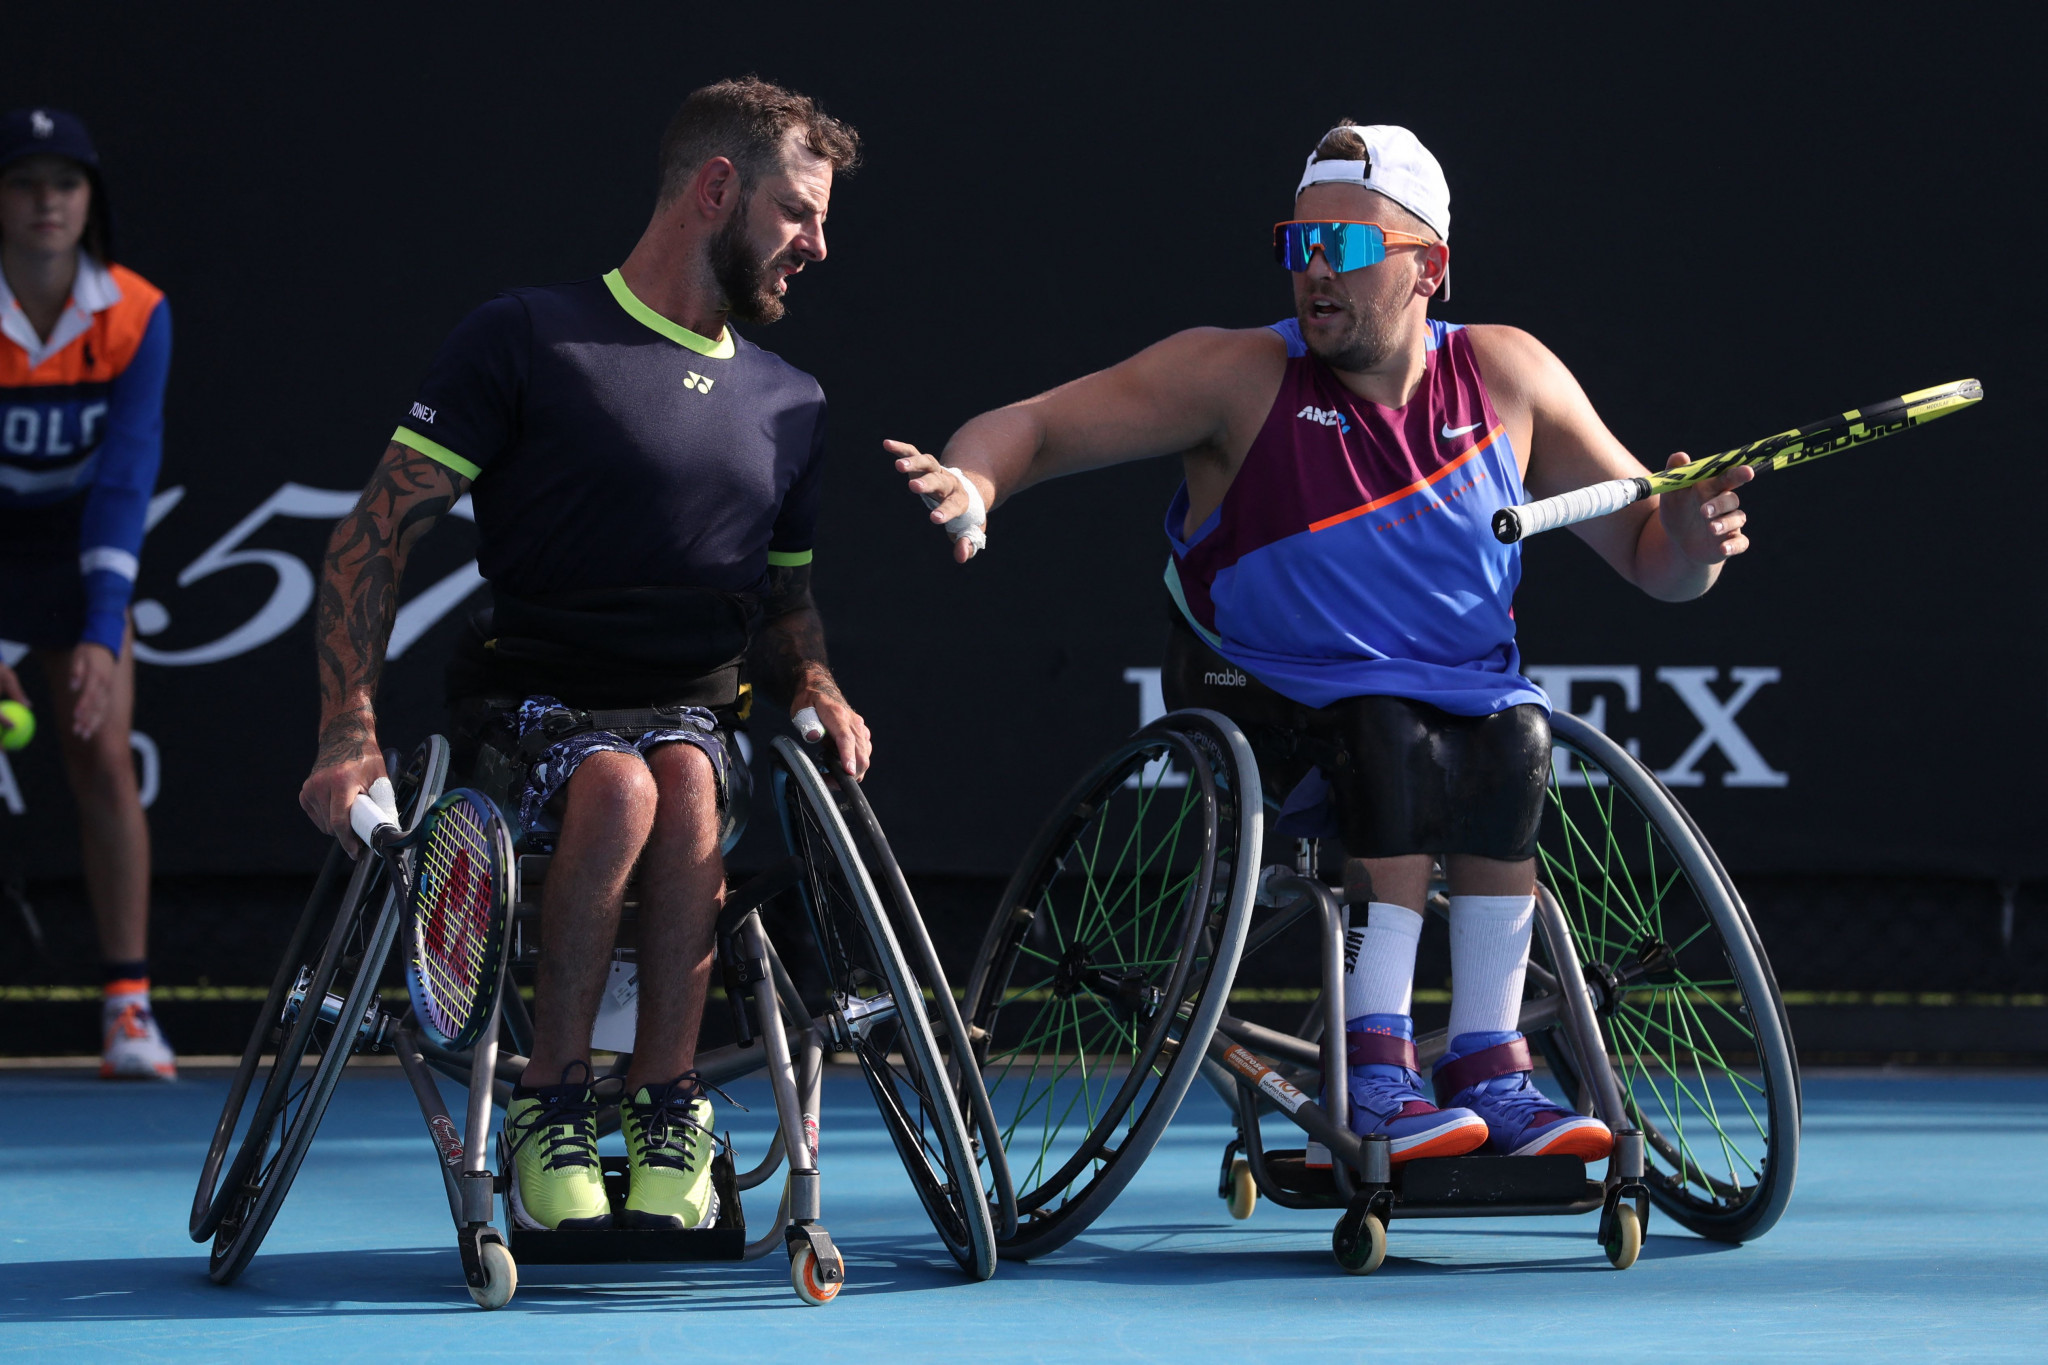 Home favourites Dylan Alcott and Heath Davidson had won the last four quad doubles tournaments at the Australian Open, but suffered a semi-final defeat to The Netherlands' Paralympic champions Sam Schröder and Niels Vink ©Getty Images